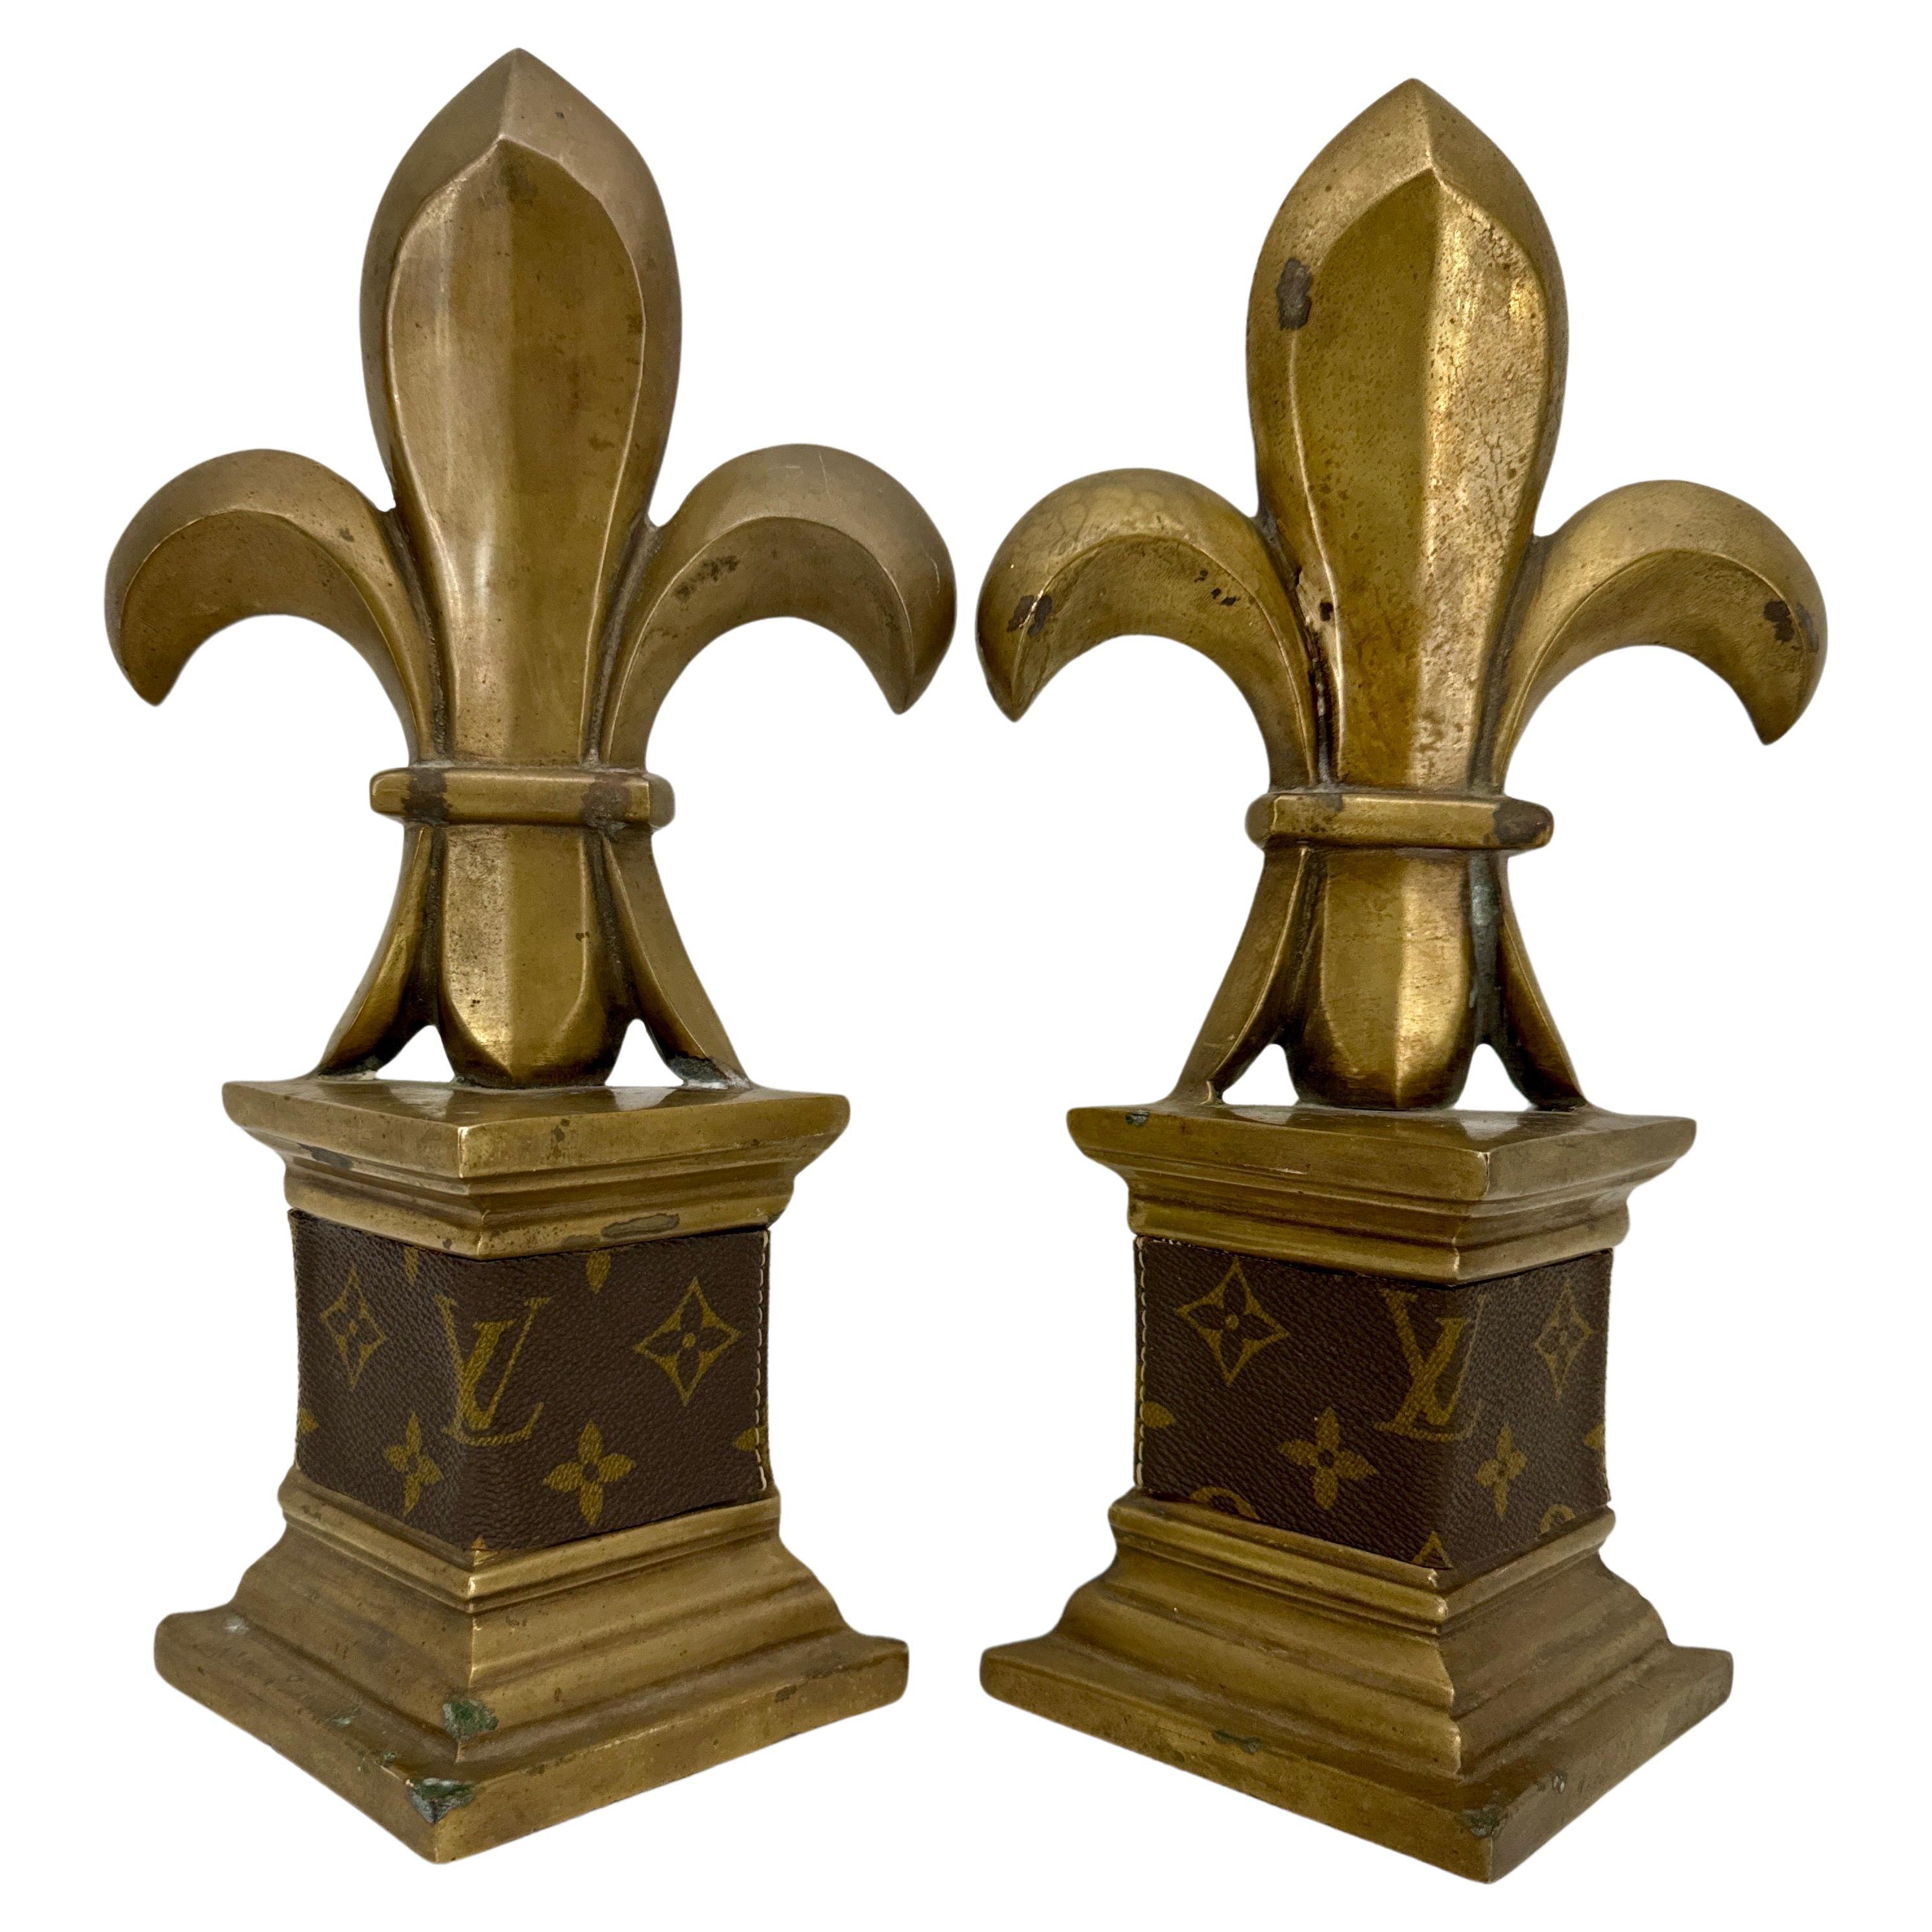  Pair of Mid-Century Brass Bookends with Louis Vuitton Monogram Fabric